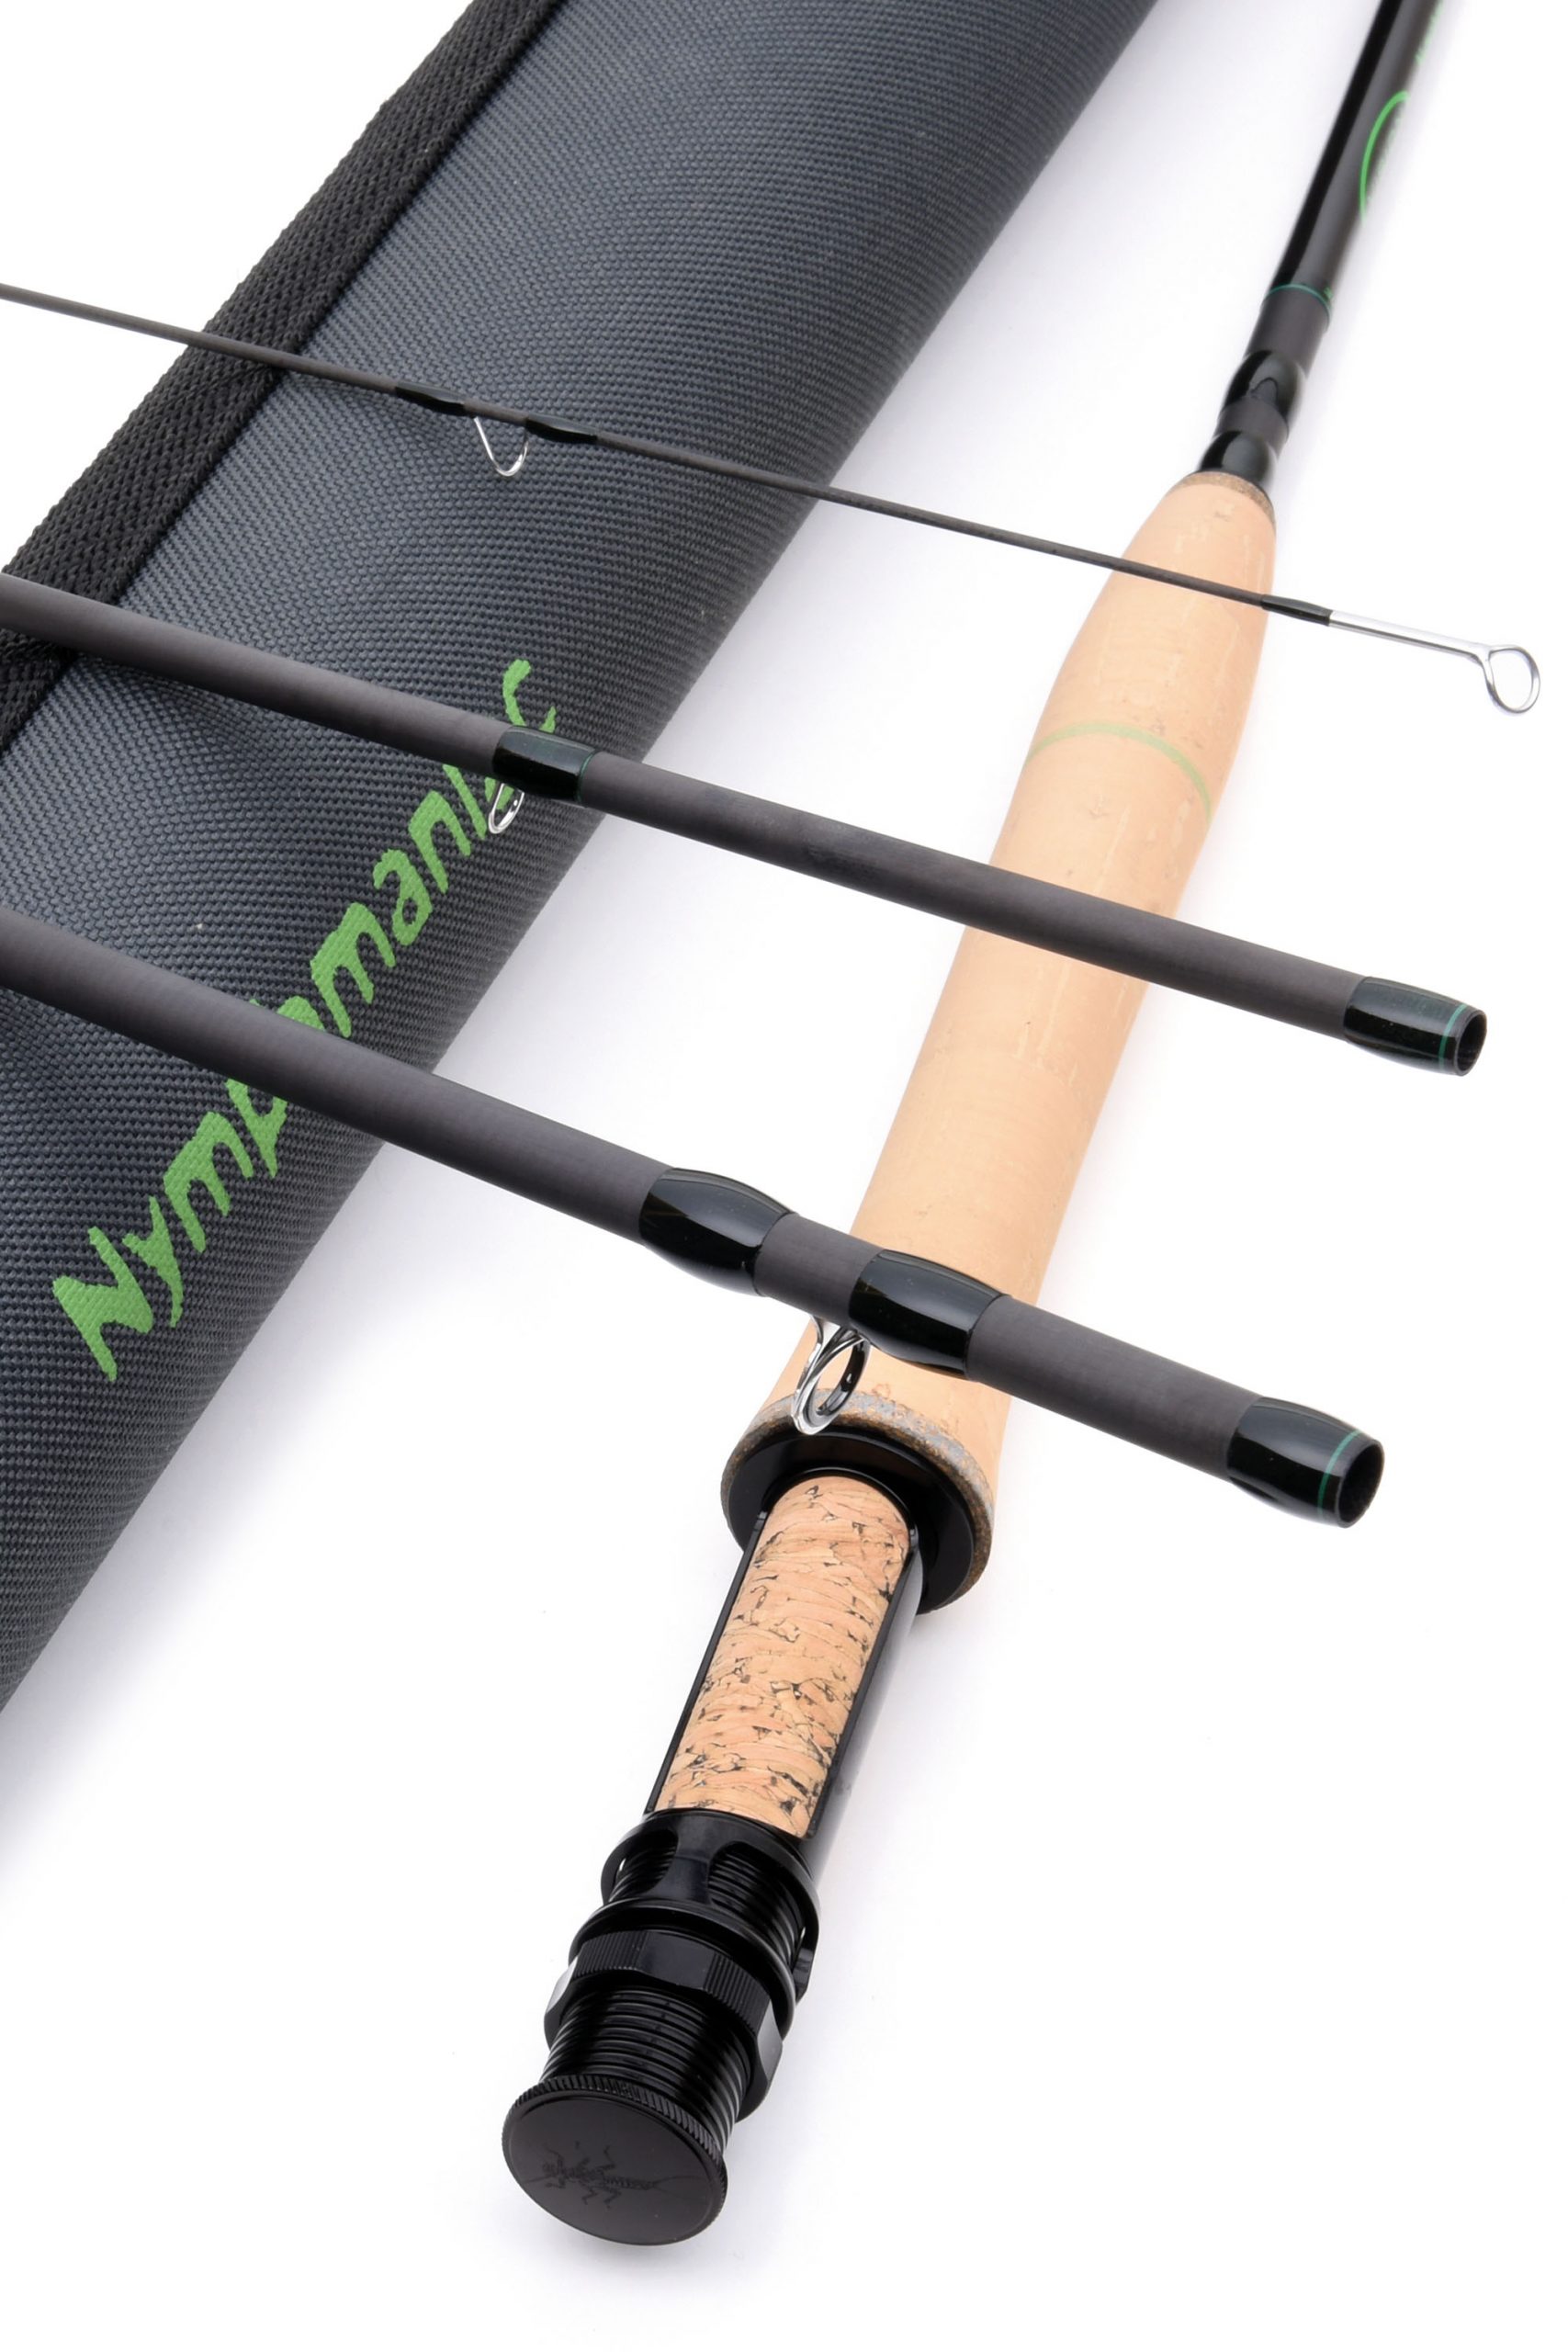 Vision Nymphmaniac Fly Rod 10 Foot #3 For Fly Fishing